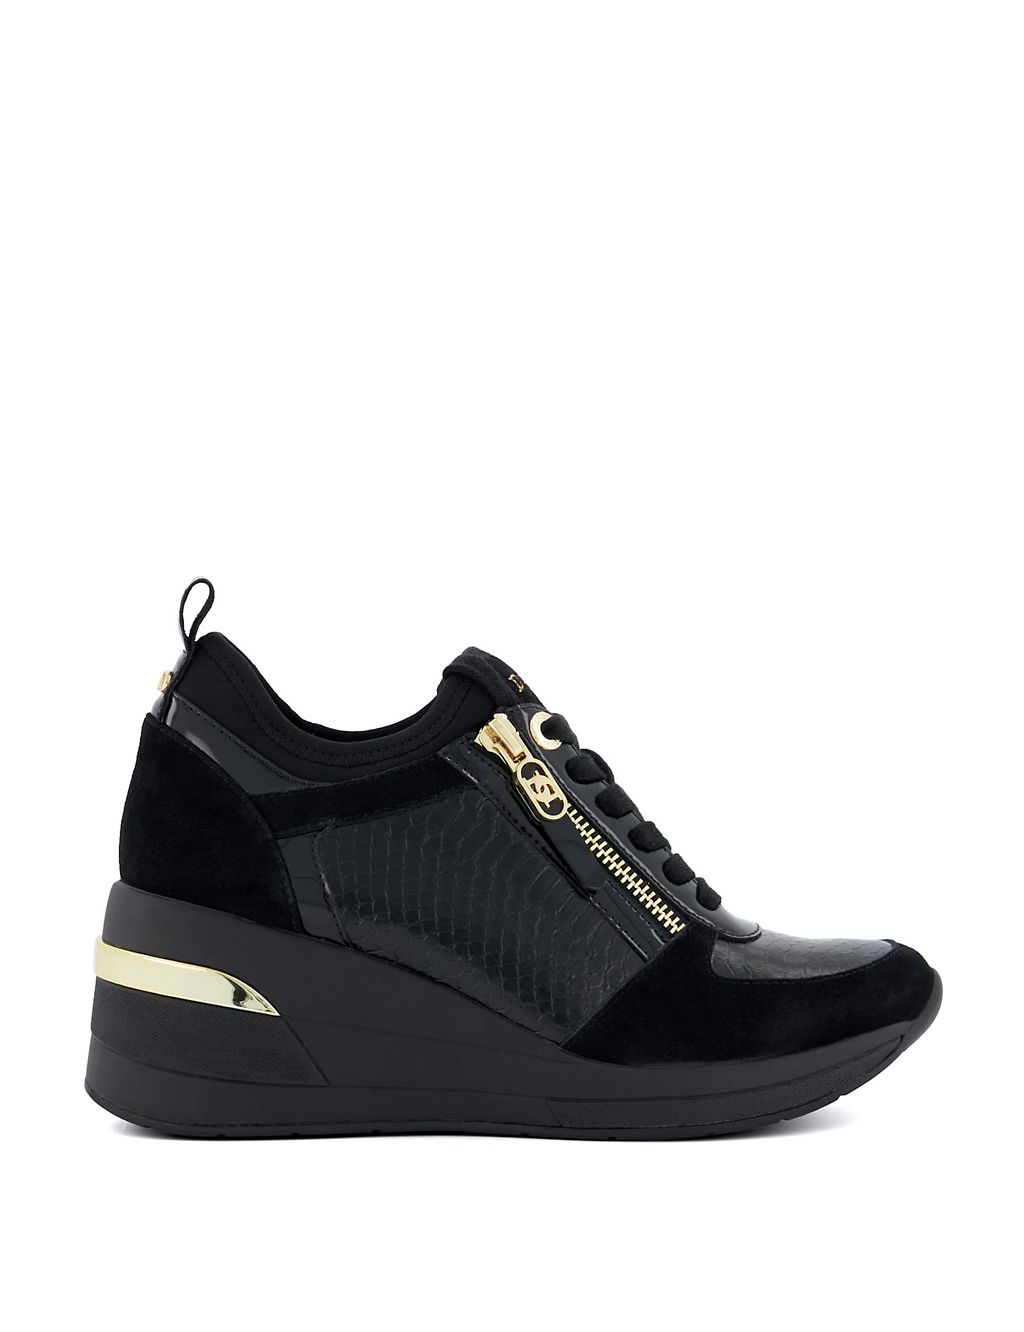 Leather Lace Up Side Detail Wedge Trainers | Dune London | M&S